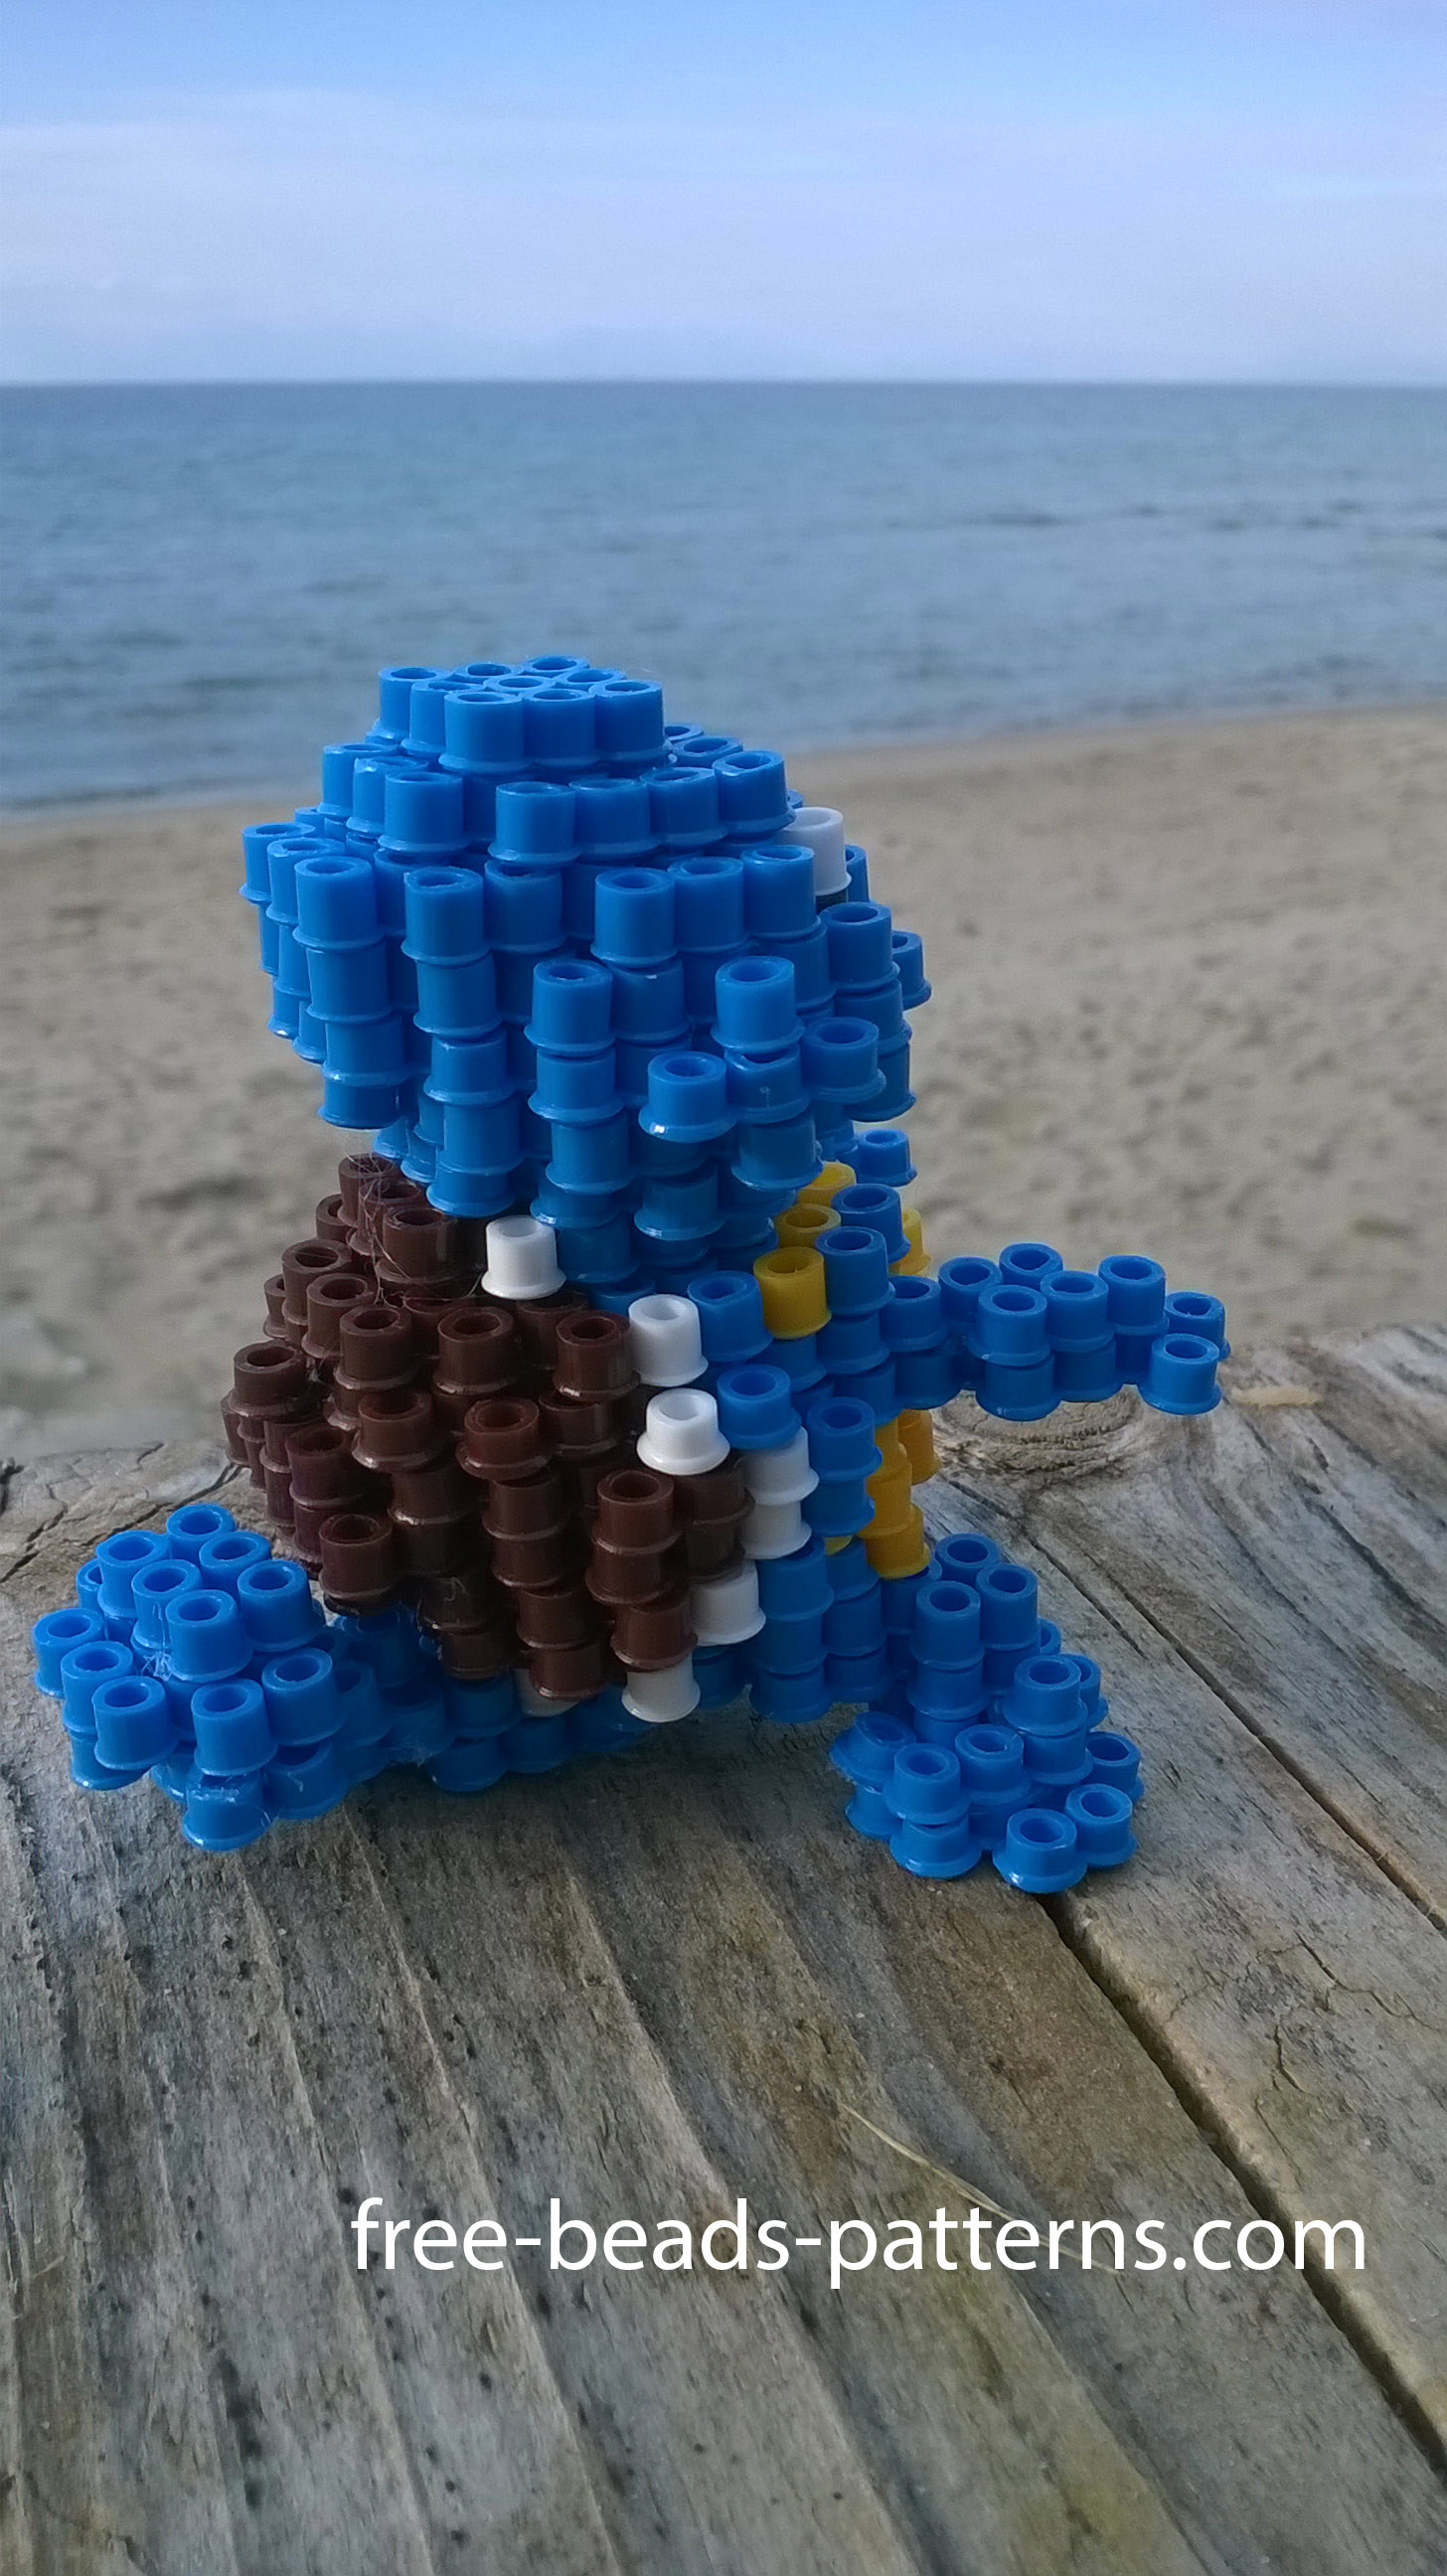 Squirtle Pokemon 3D Perler Beads Hama Beads at the beach photos (2)